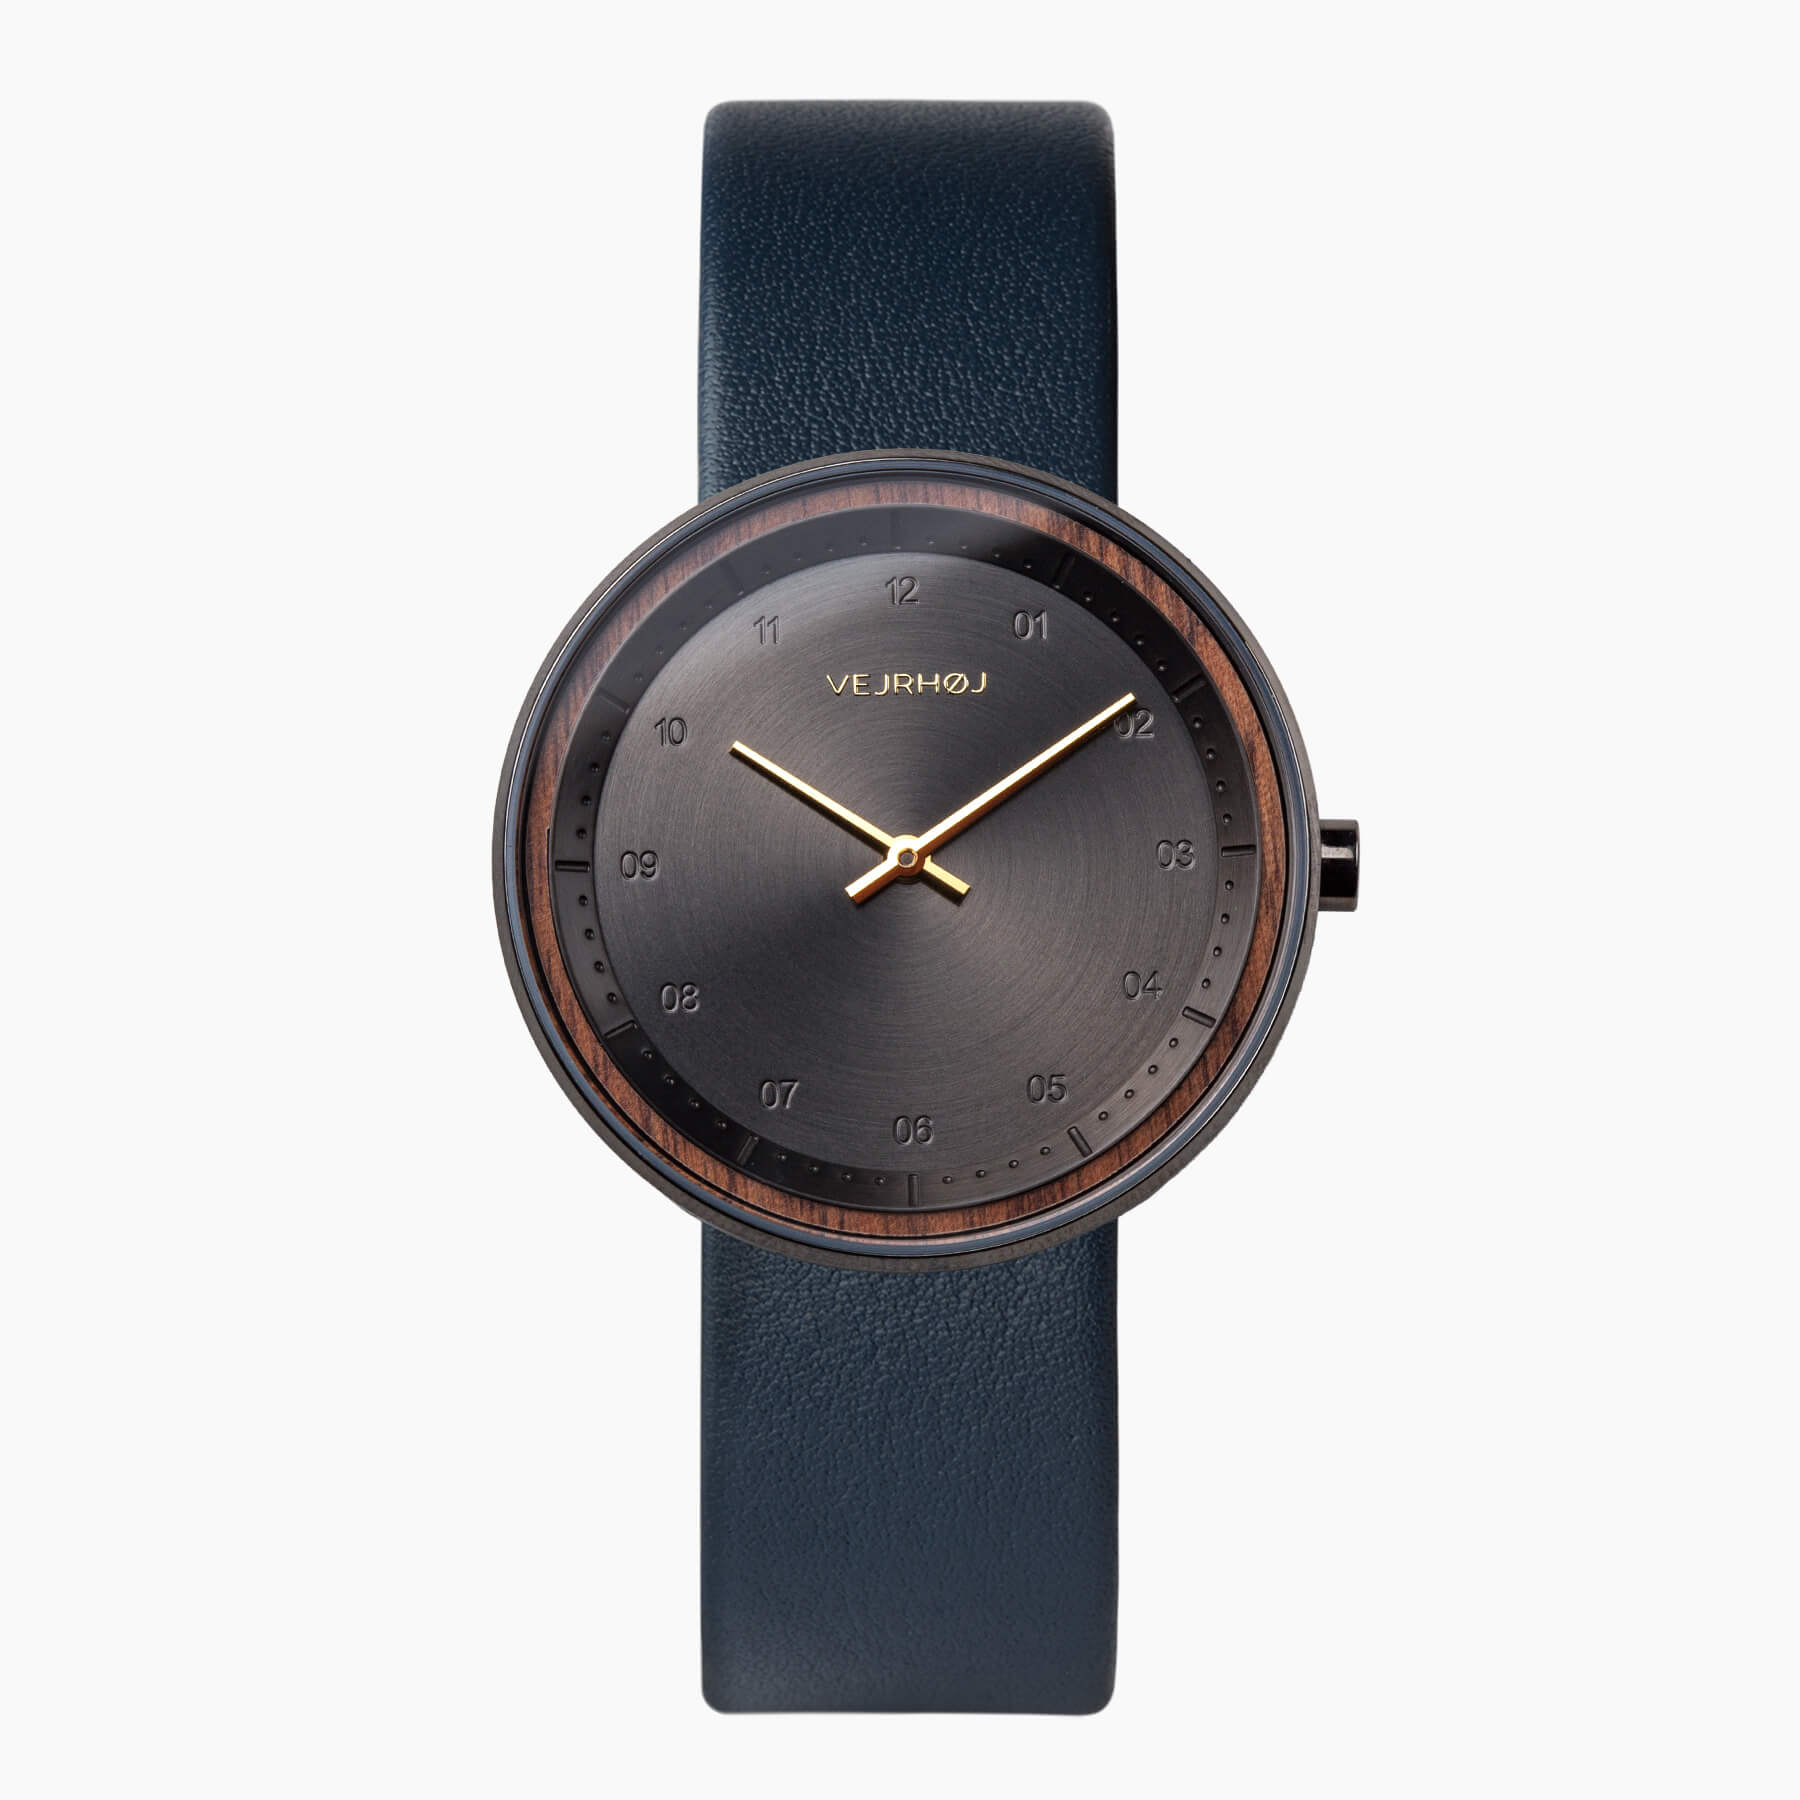 black and gold watch